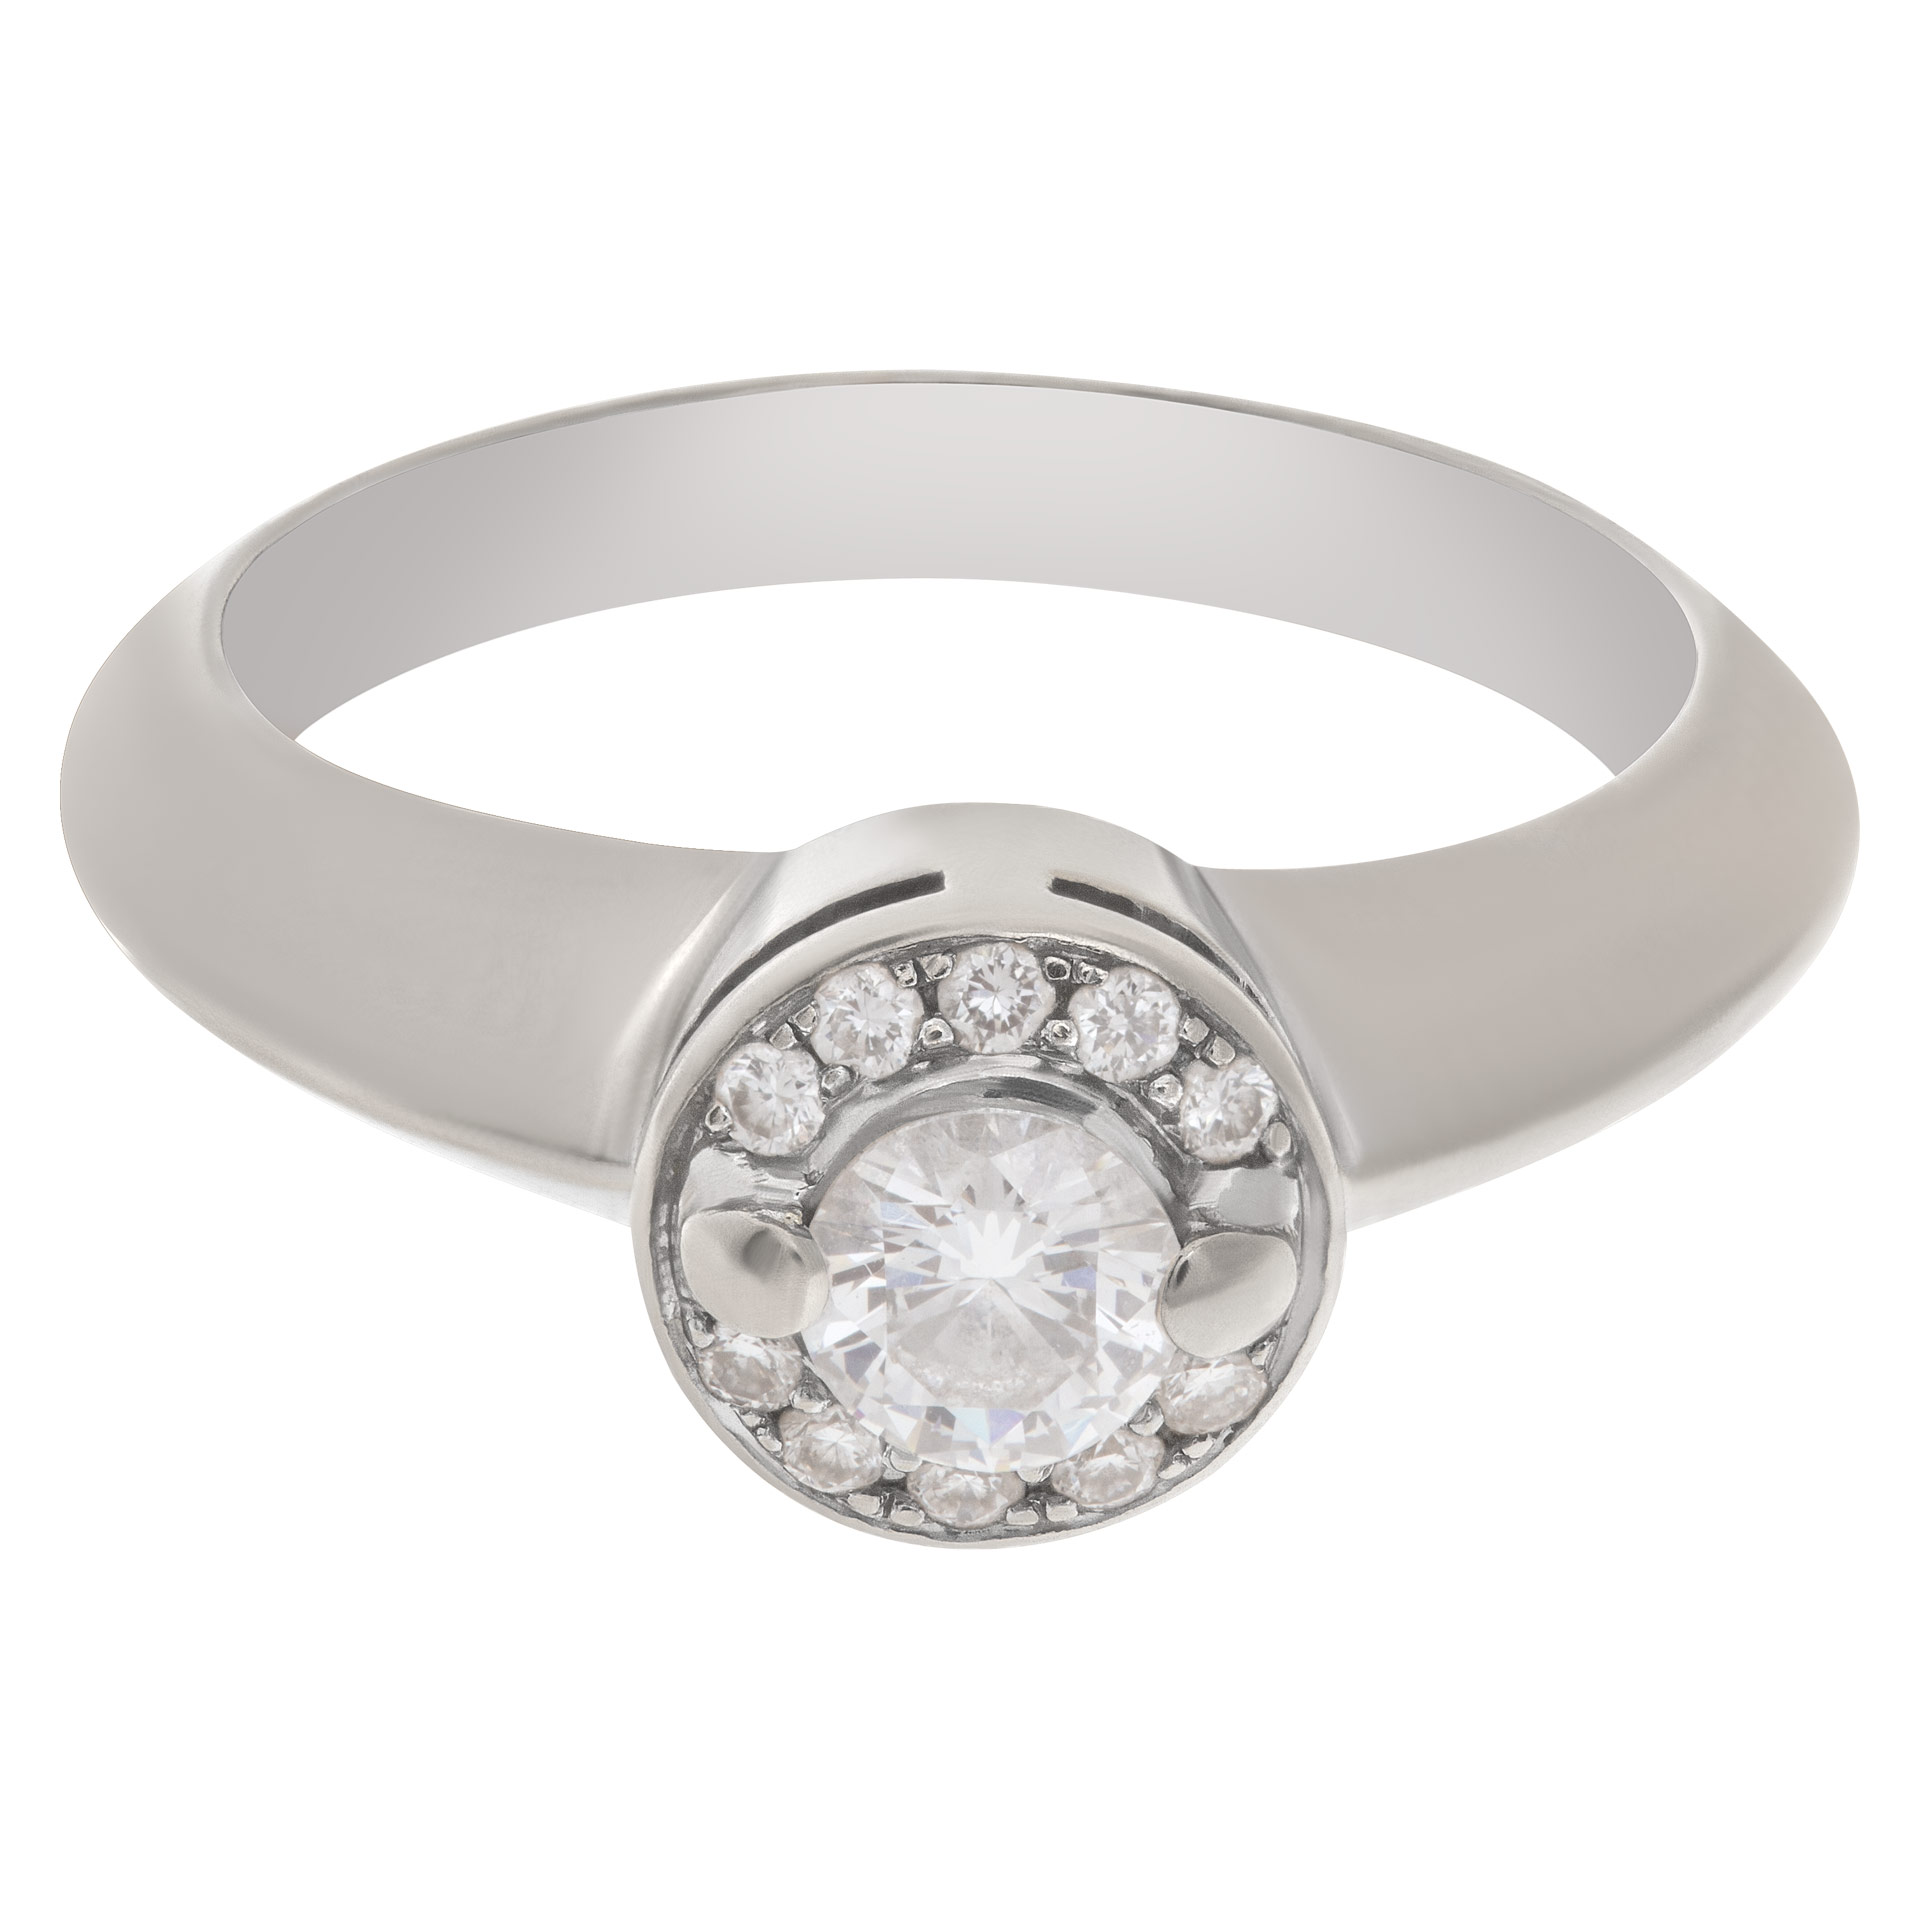 Diamond ring in 18k white gold with approximately 0.43 carats image 3